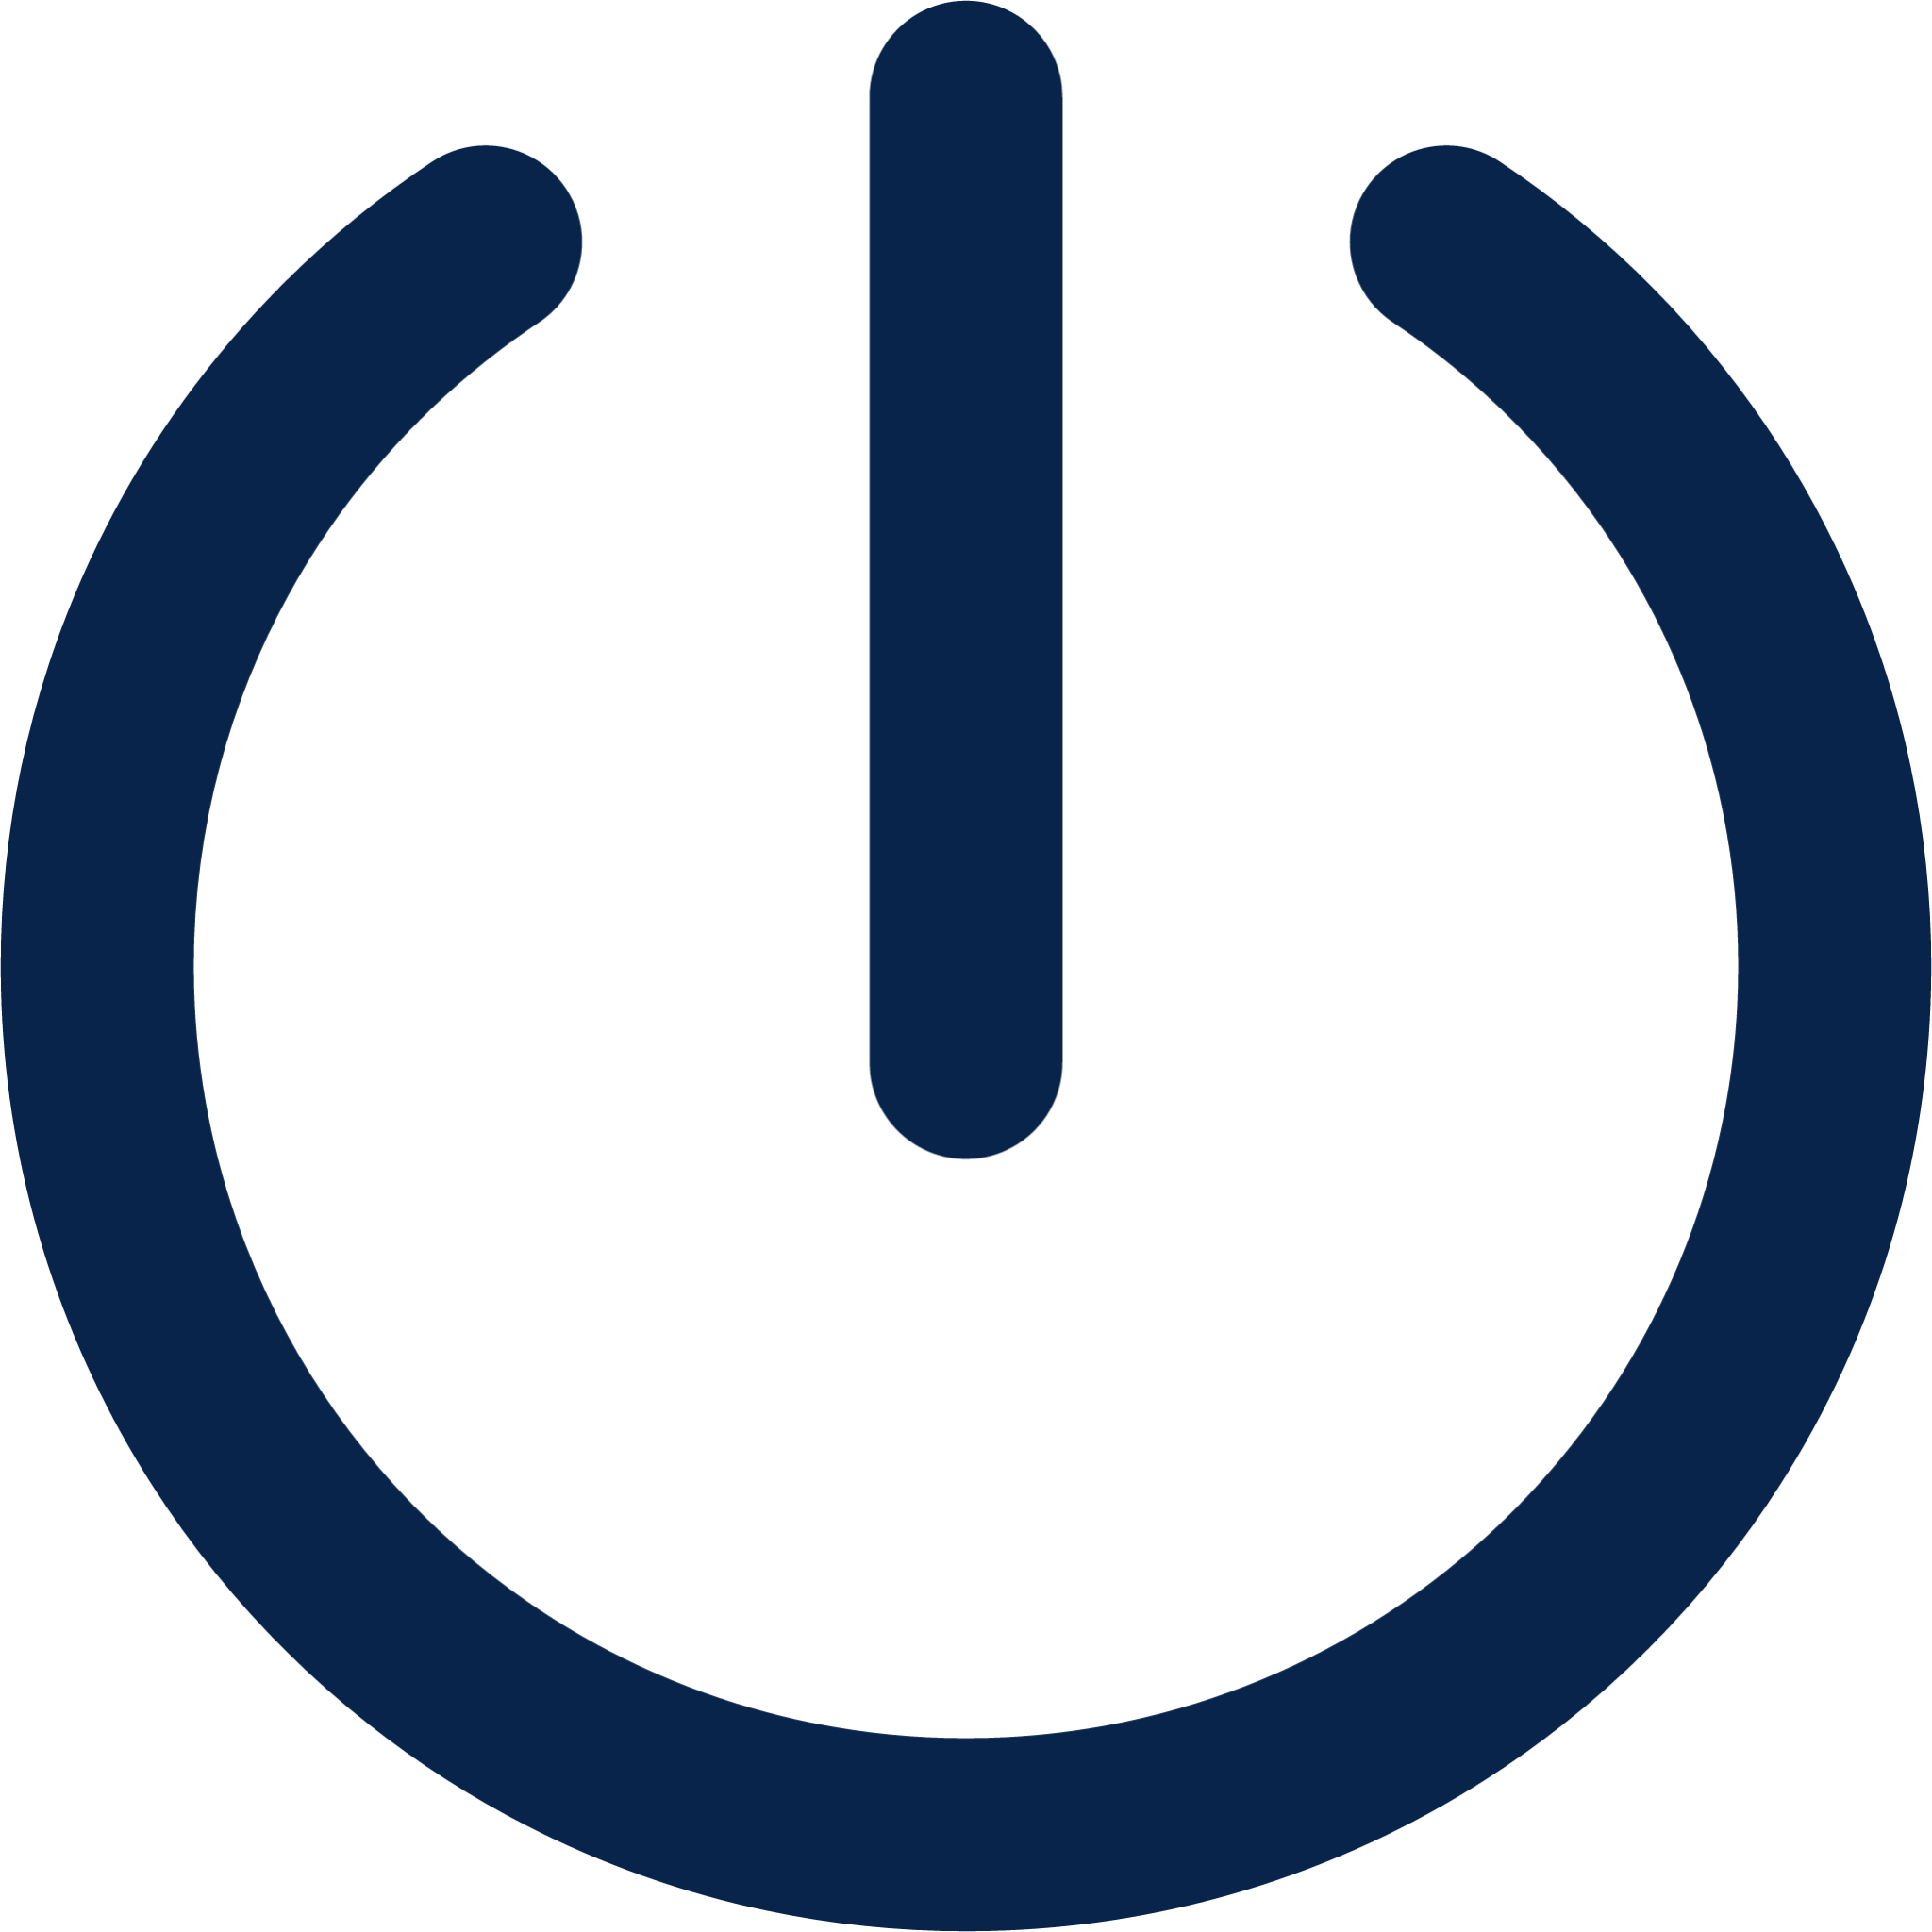 power line system icon